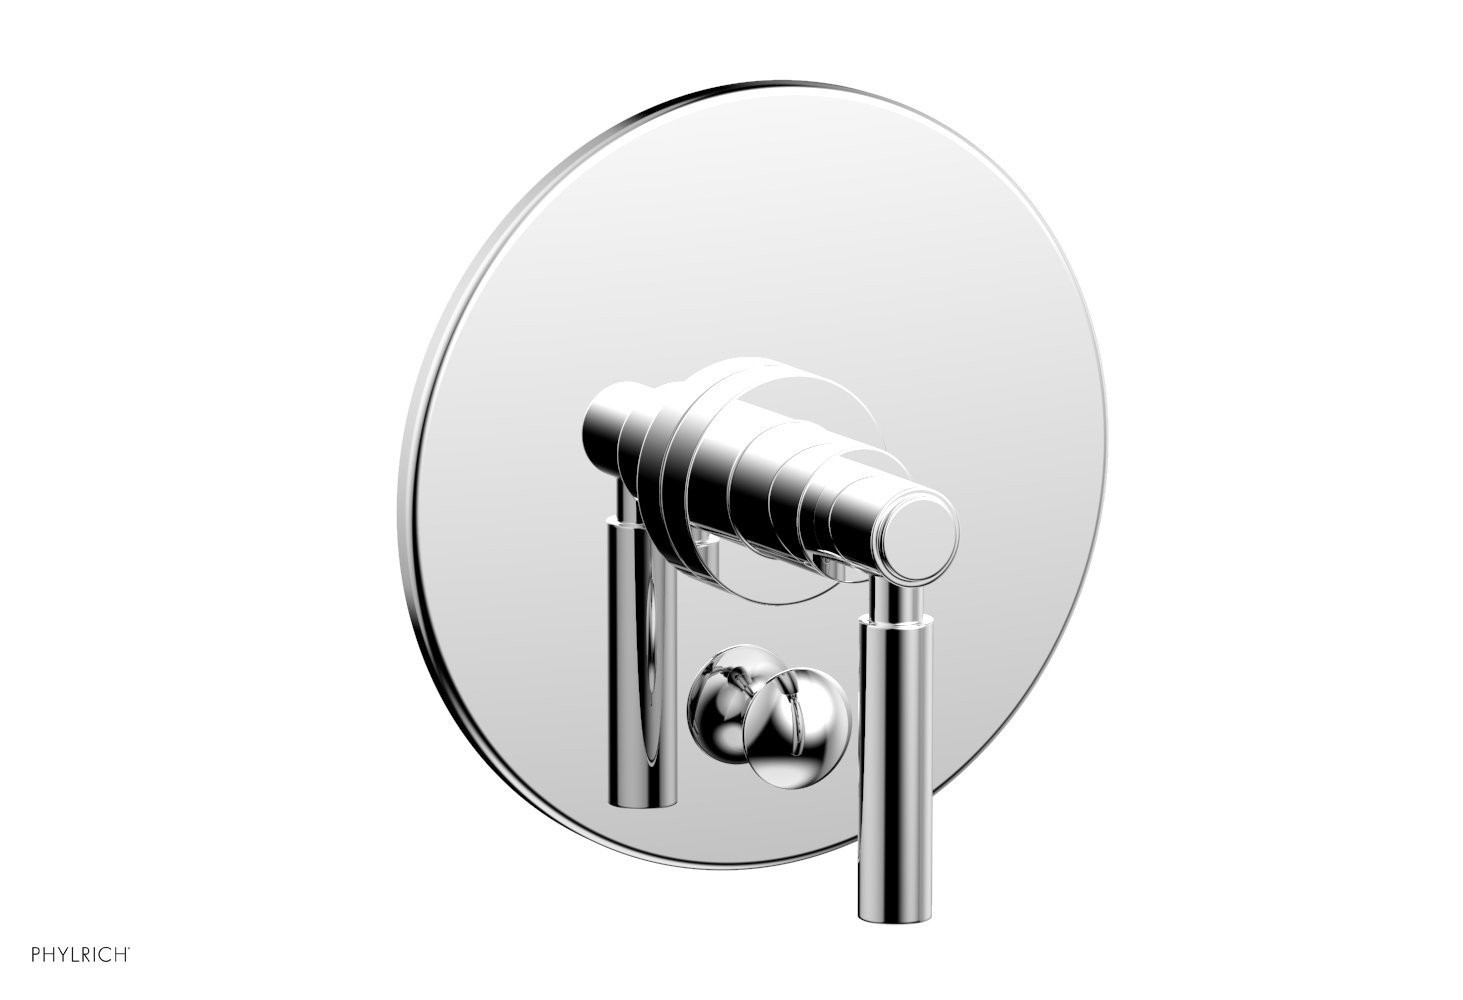 PHYLRICH DPB2130TO BASIC PRESSURE BALANCE SHOWER PLATE WITH DIVERTER AND LEVER HANDLE TRIM